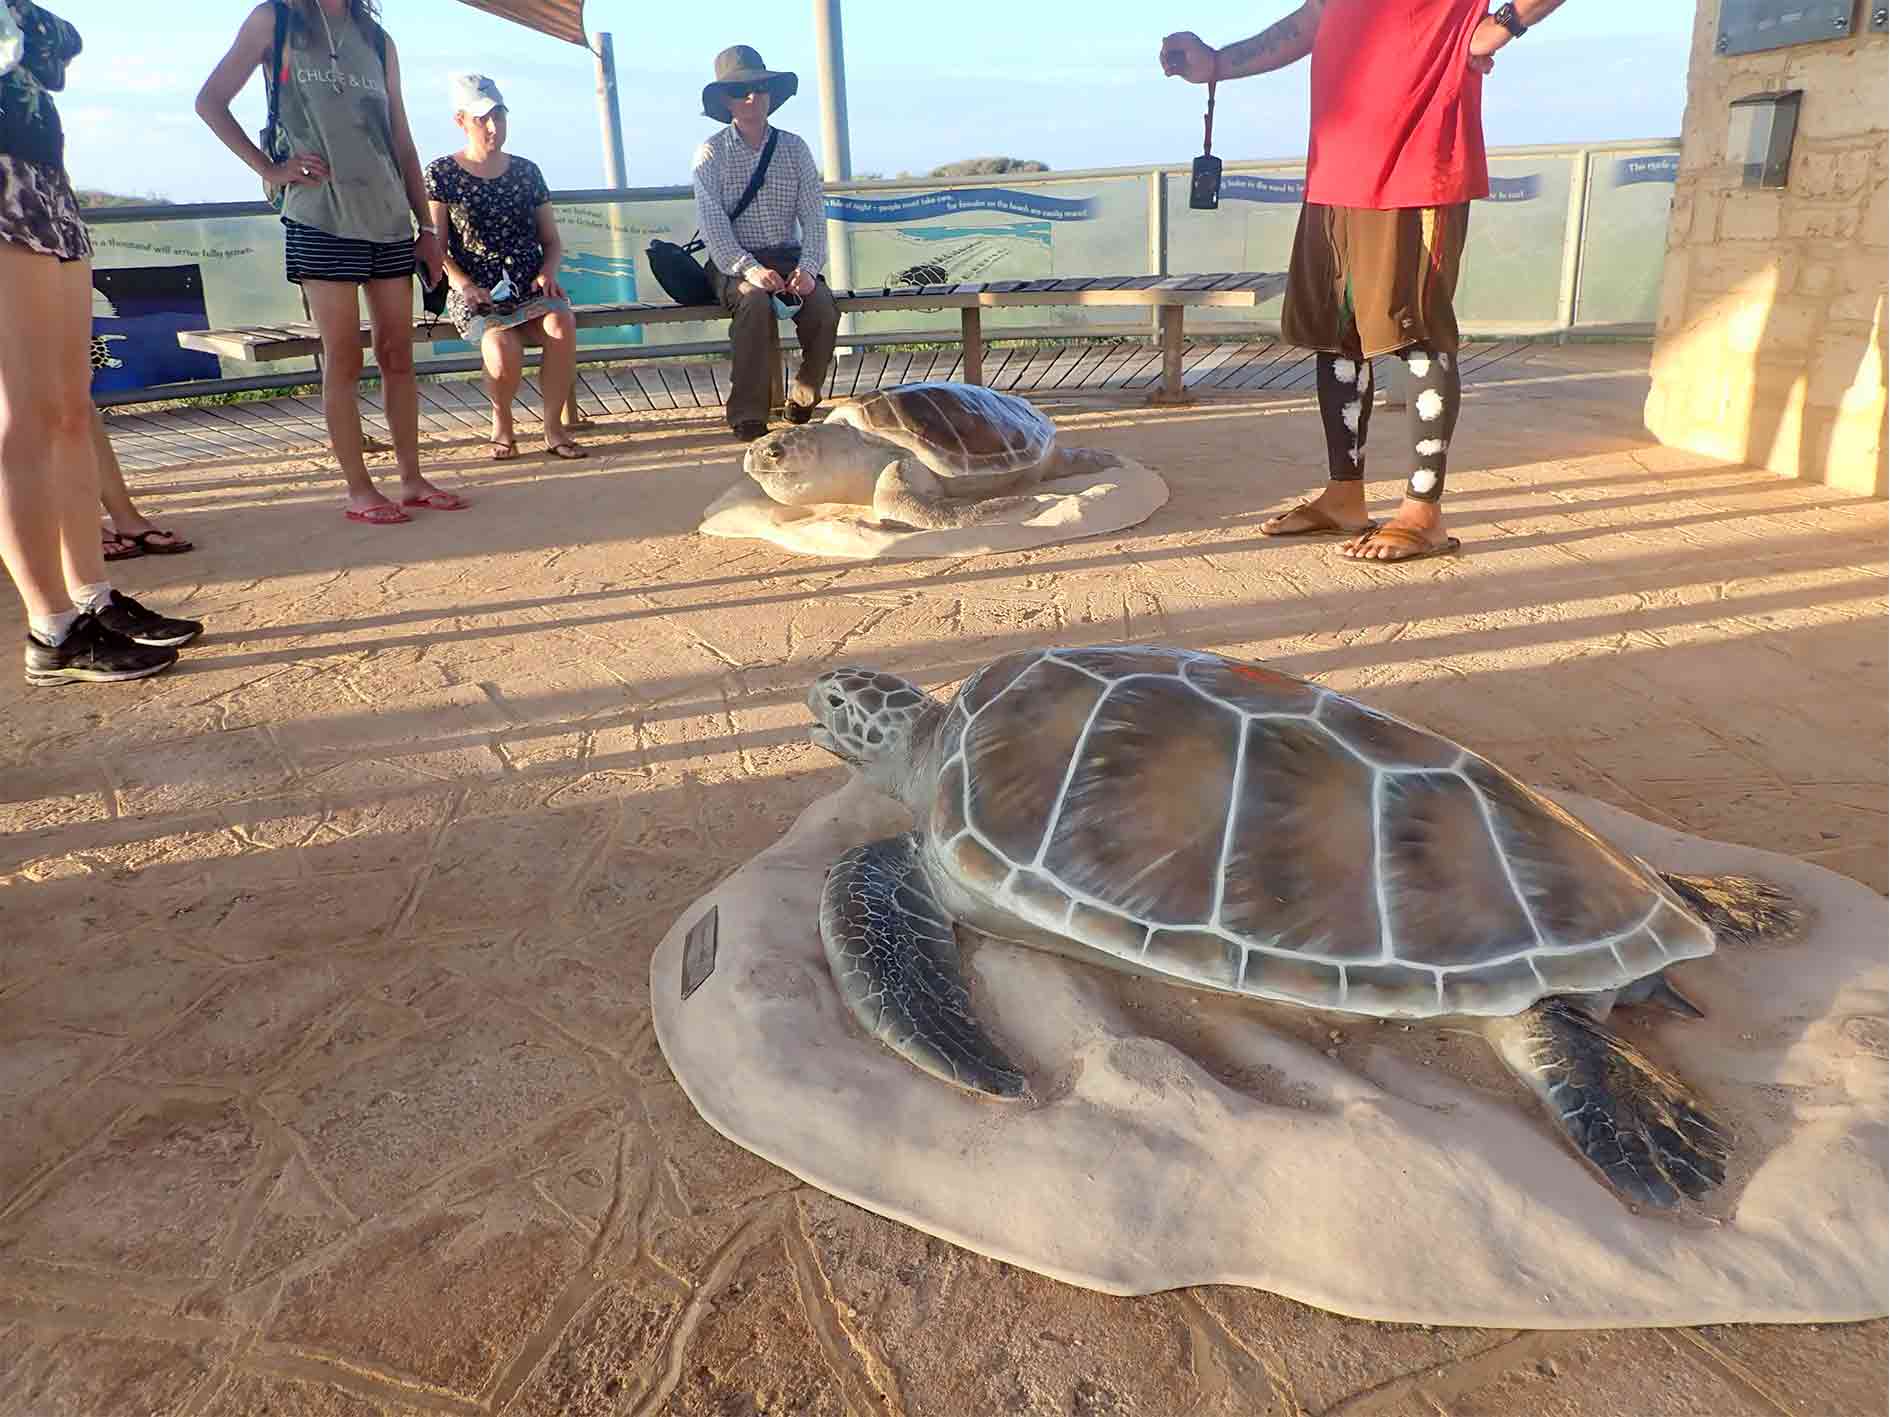 Learn about marine turtles and their nesting habits at the Jurabi Turtle Centre